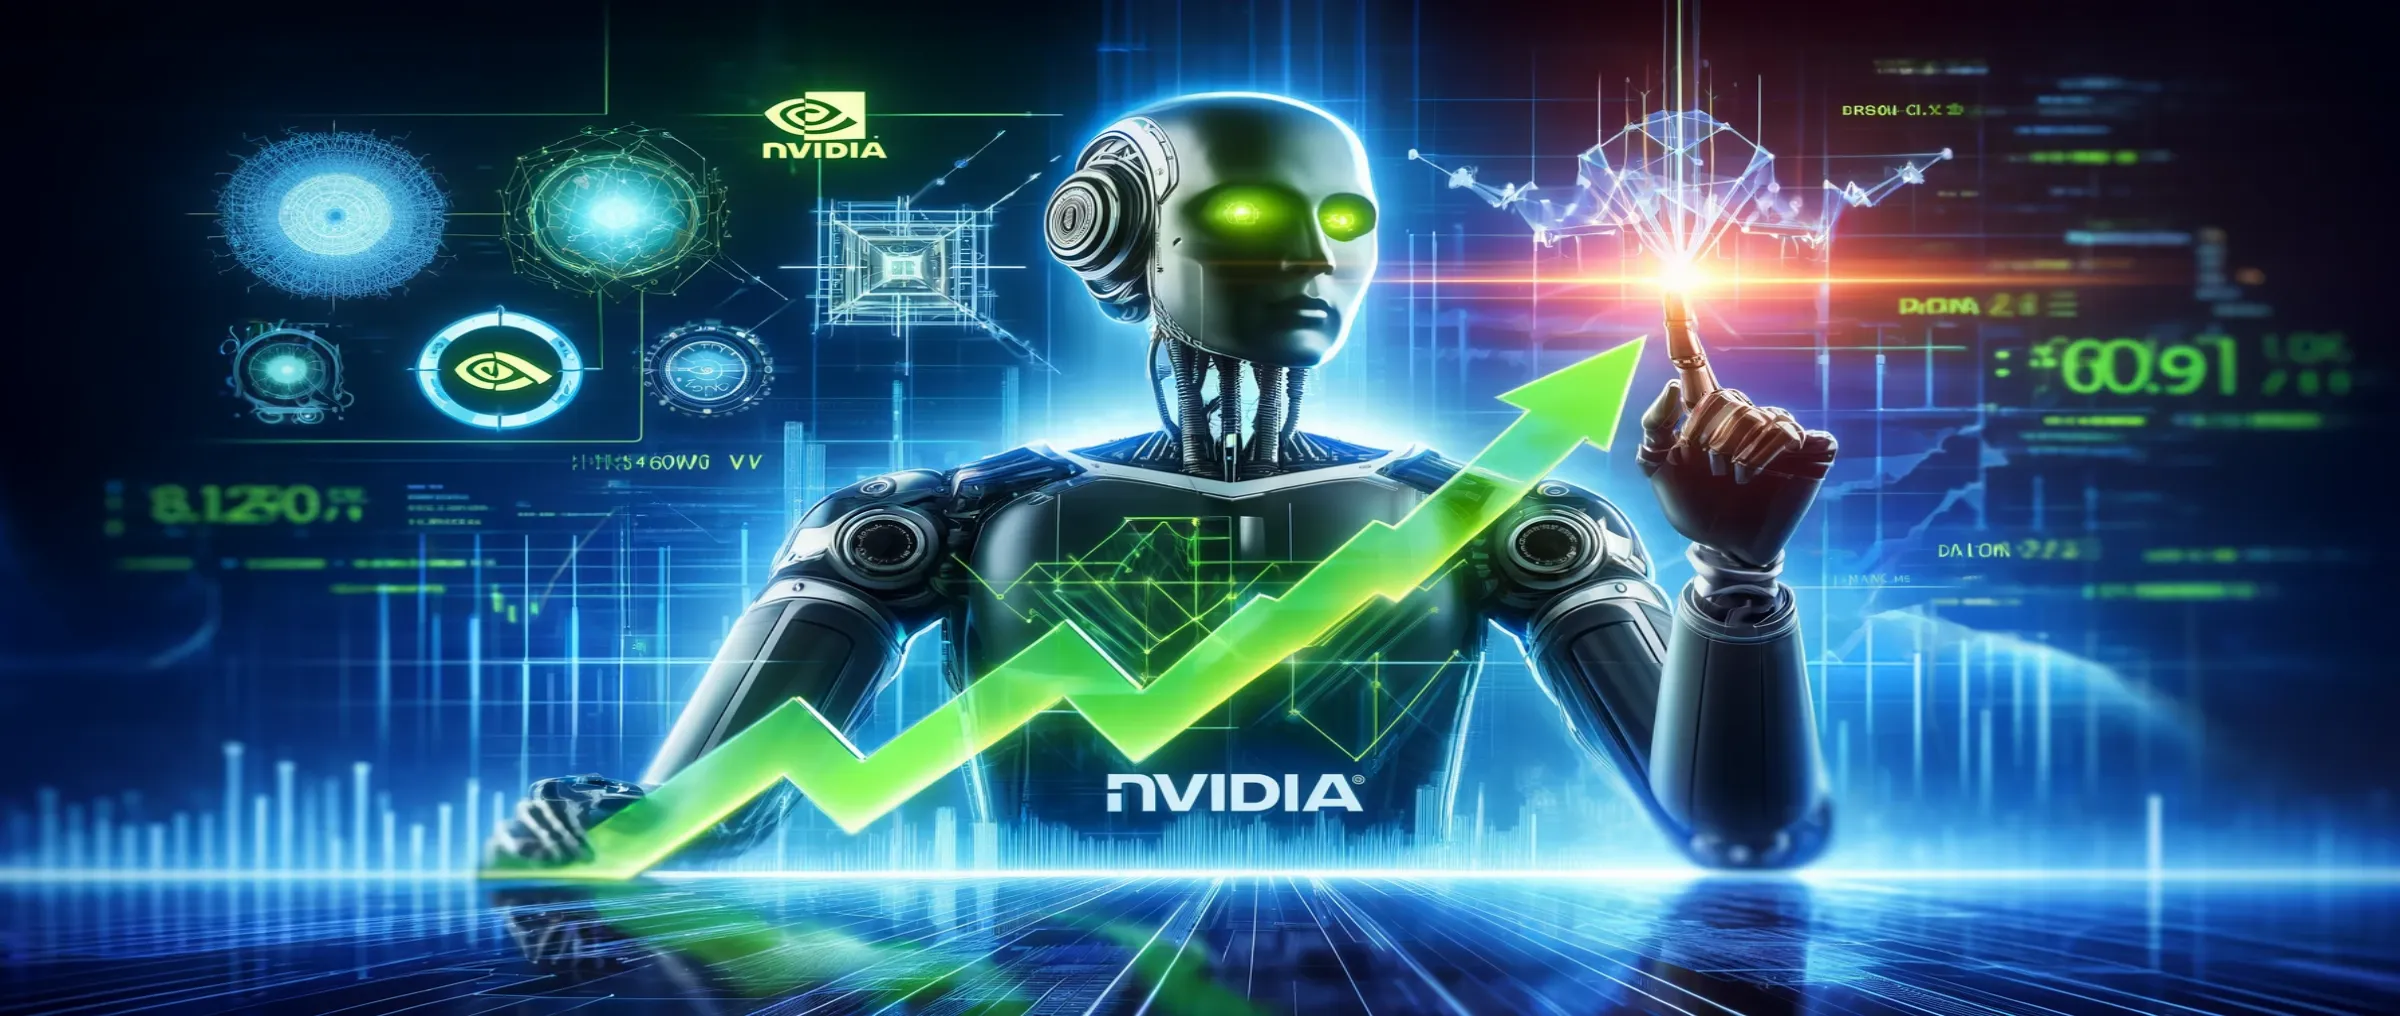 NVIDIA's profit growth drives the development of AI and DePIN tokens